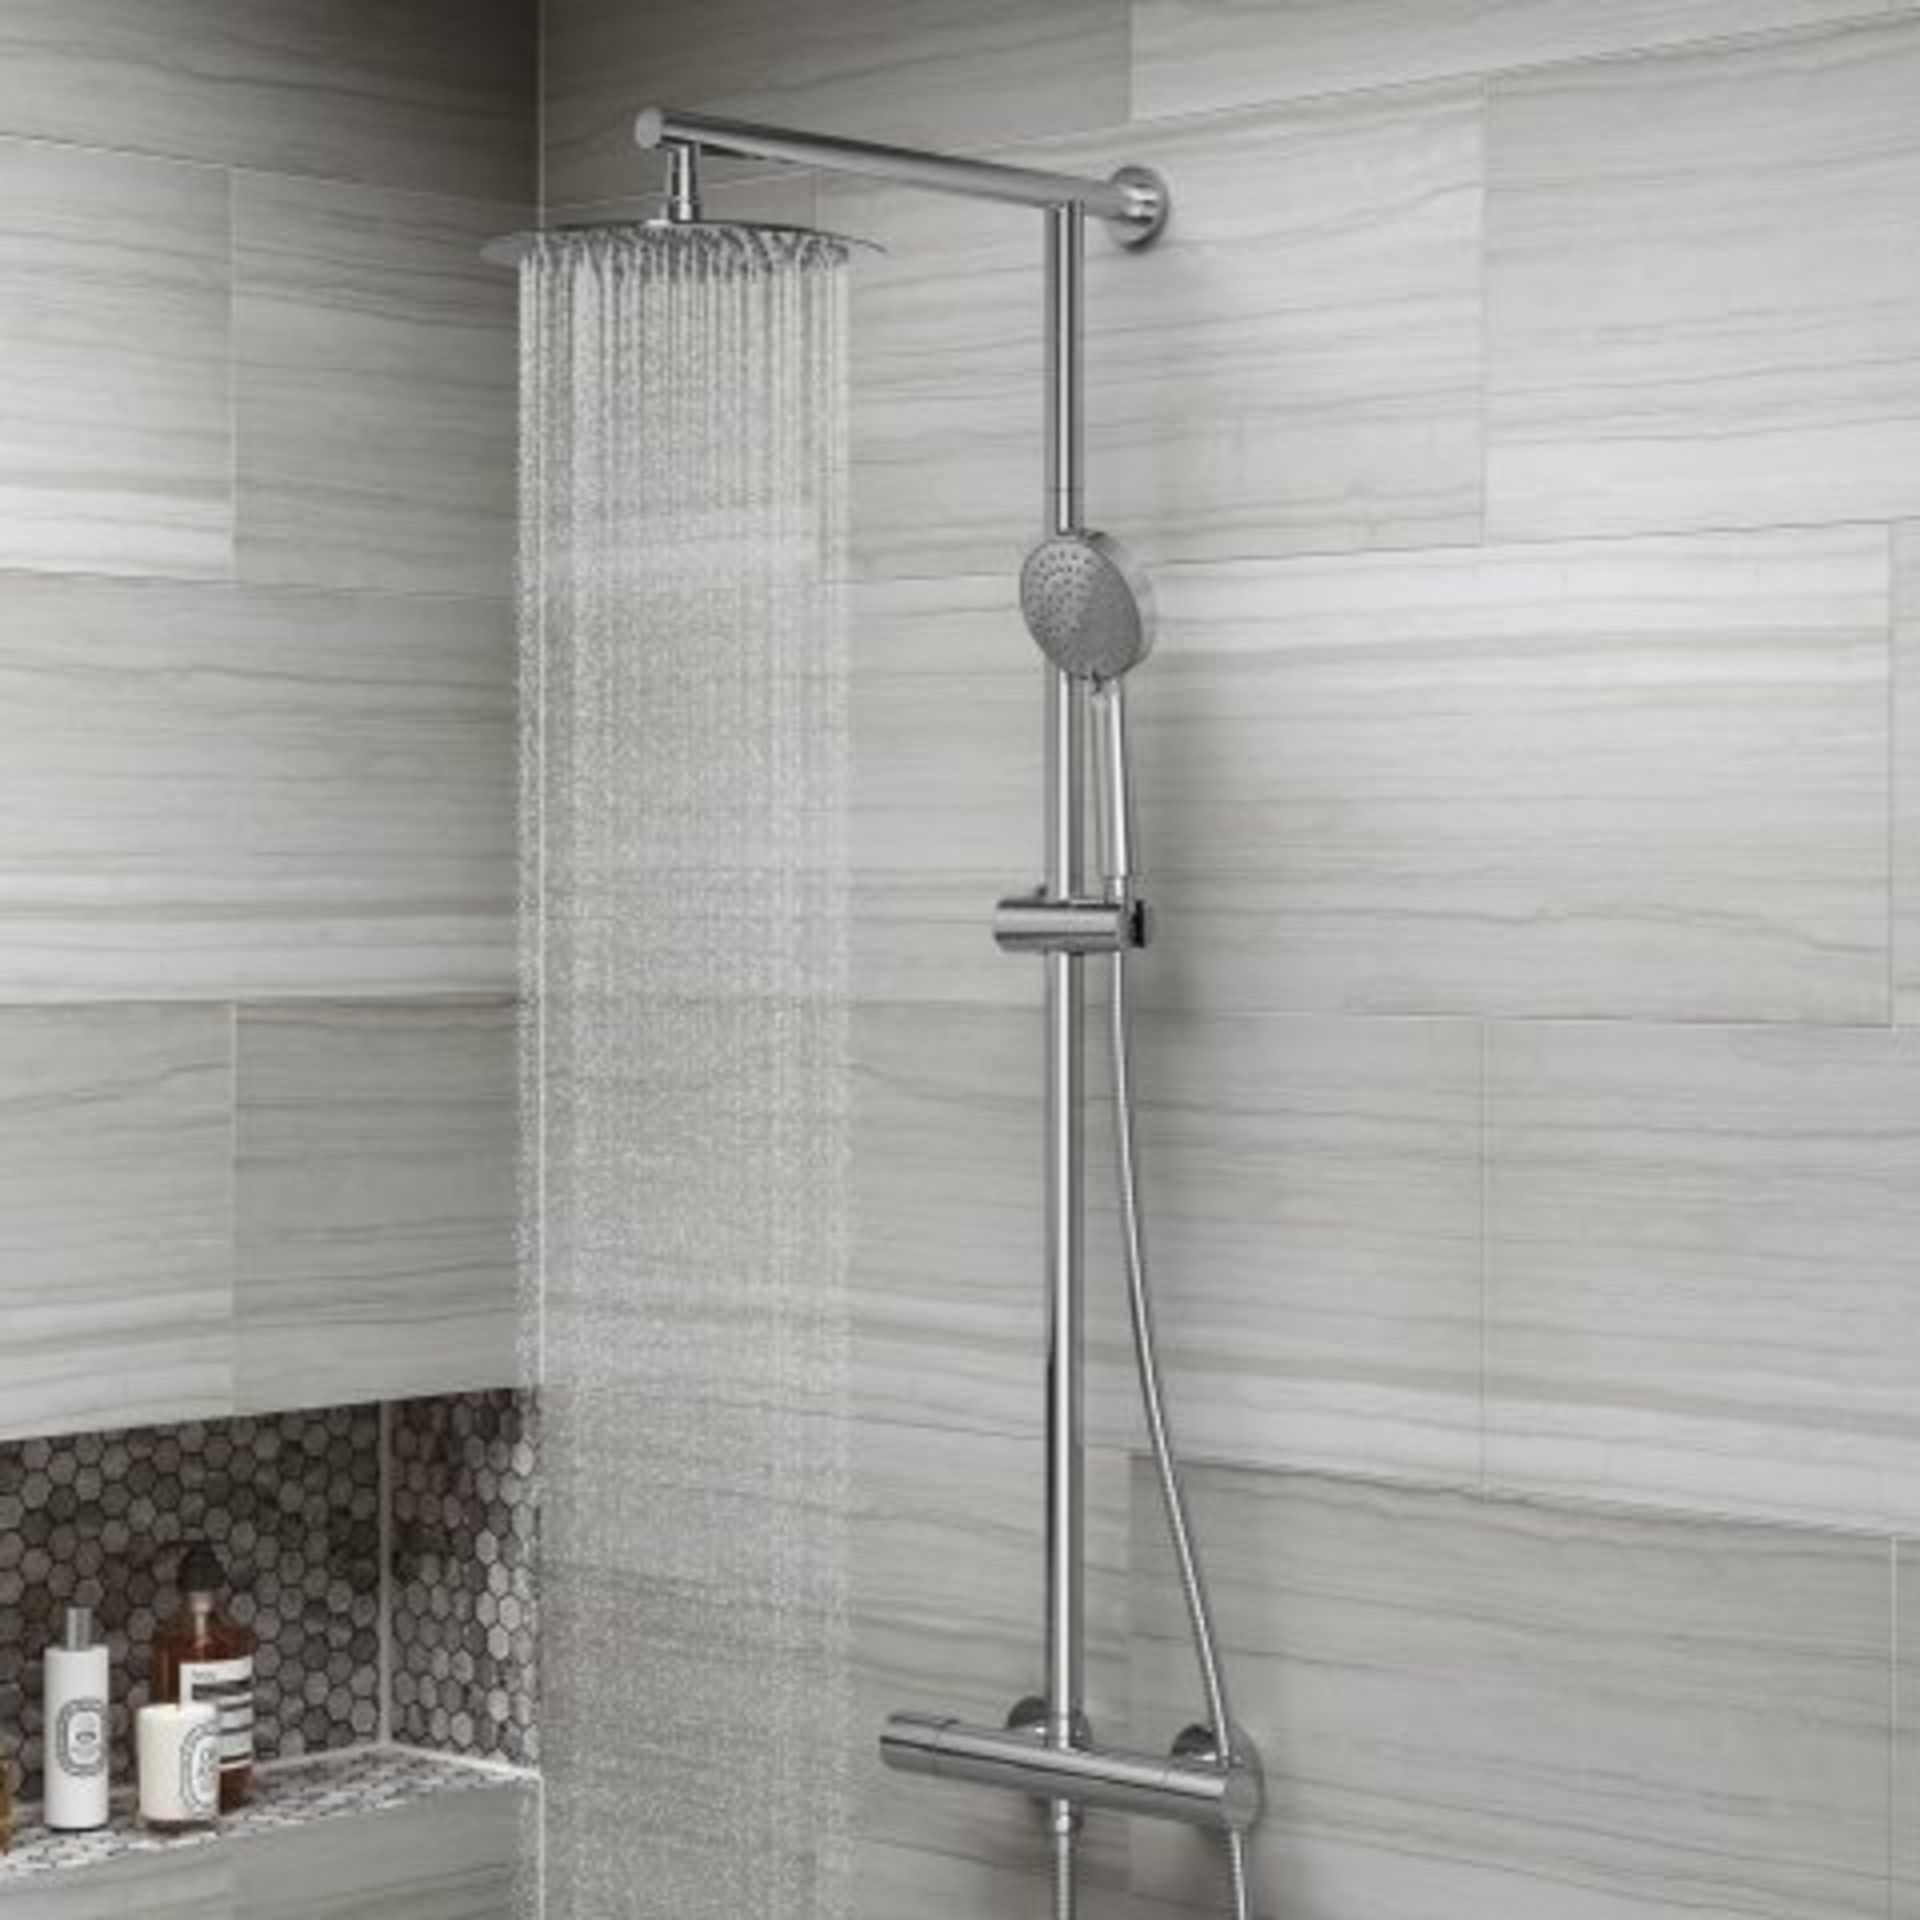 (M20) 250mm Large Round Head Thermostatic Exposed Shower Kit & Handheld. RRP £299.99. Designer Style